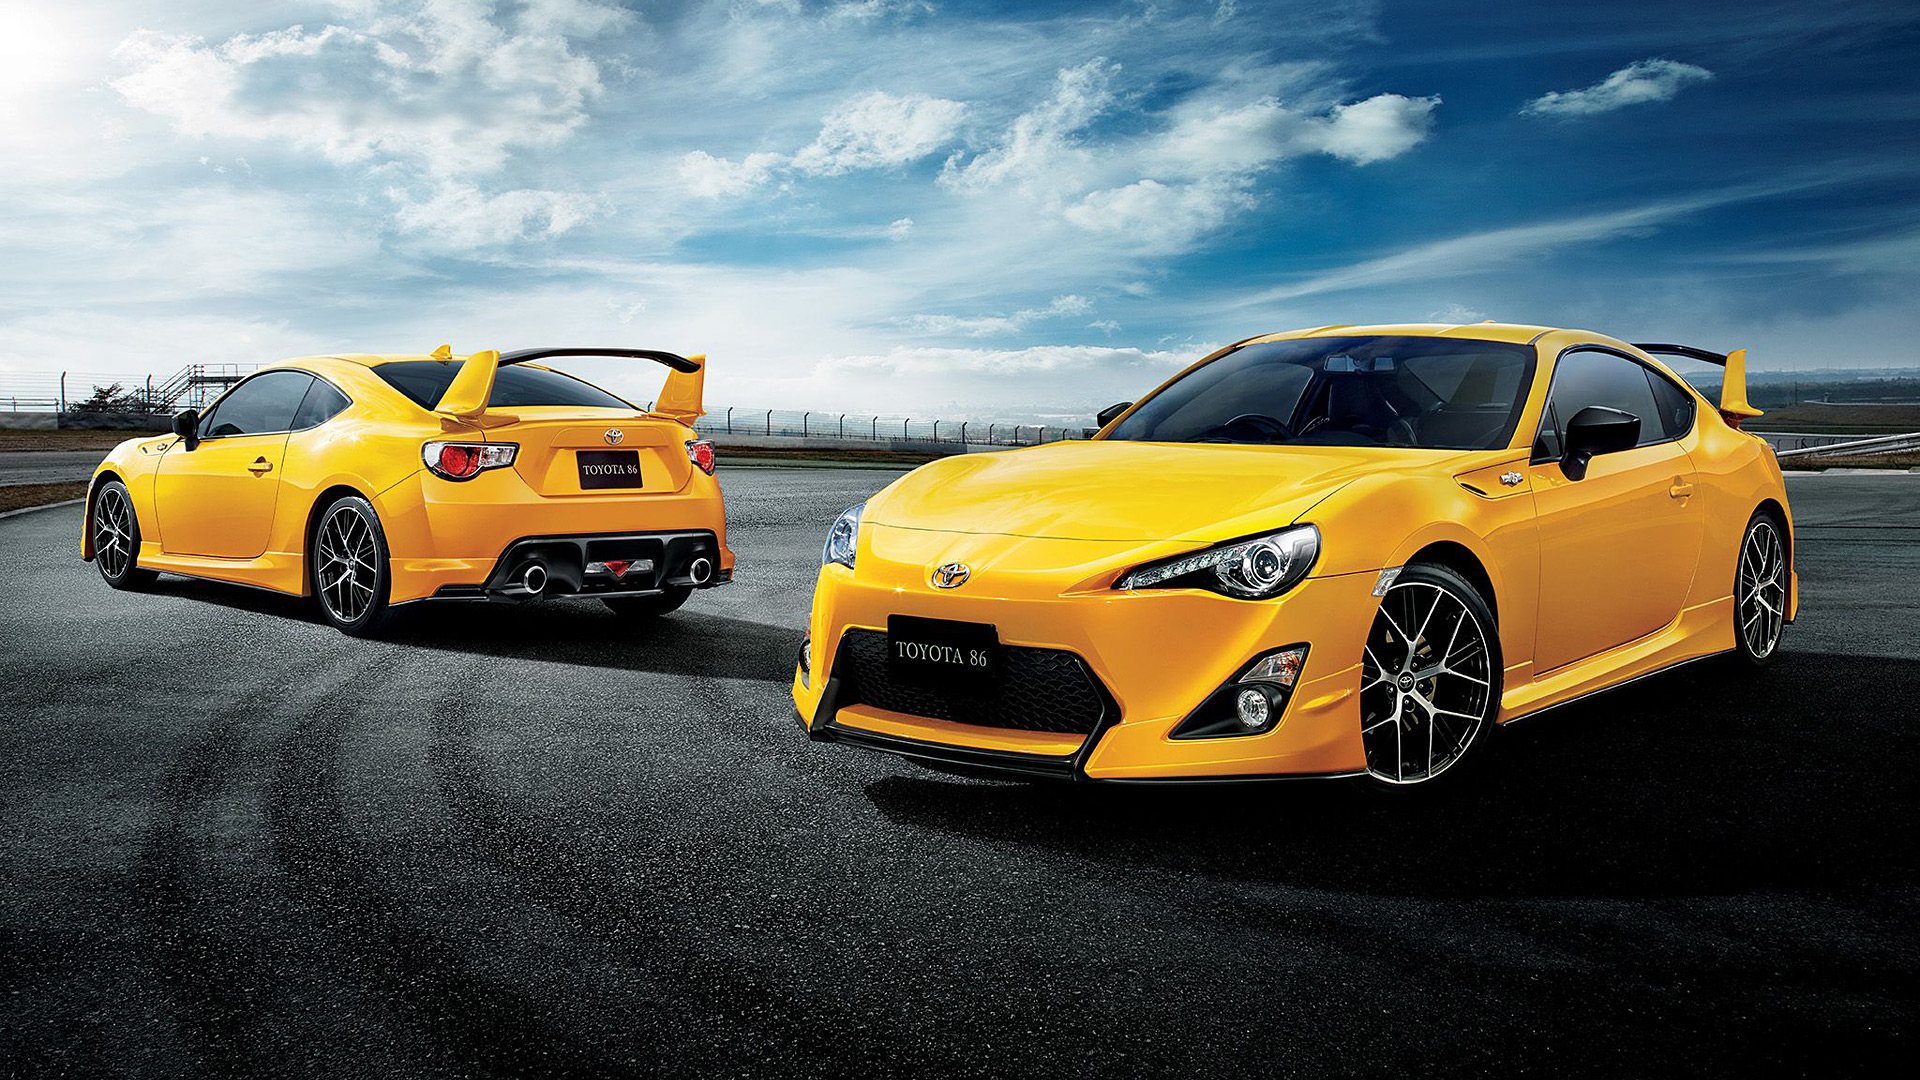  2015 Toyota GT 86 Yellow Limited Wallpaper.